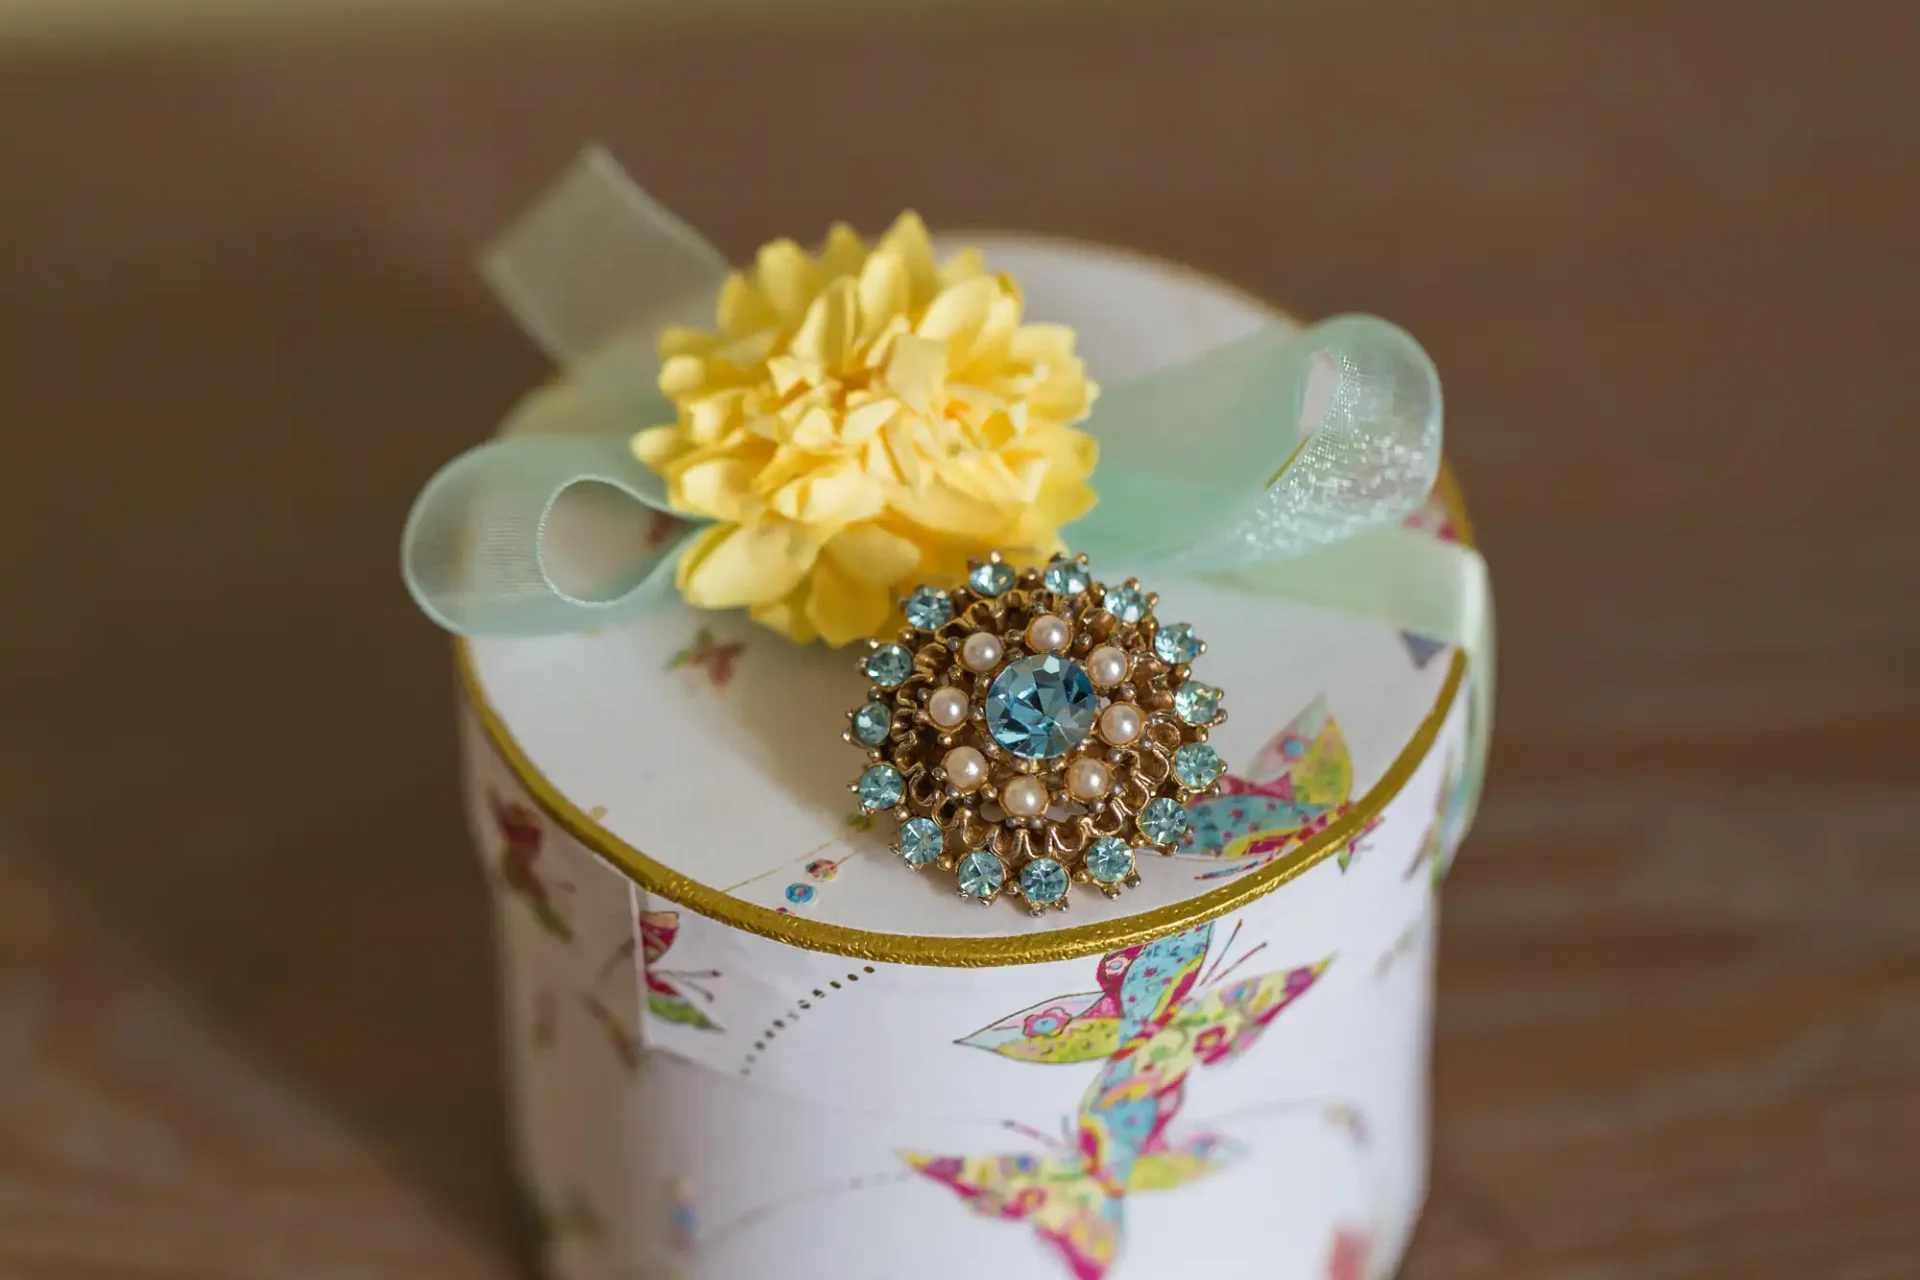 A decorative round box with floral prints, adorned with a light blue and gold brooch and a yellow flower on top, tied with a pale green ribbon.